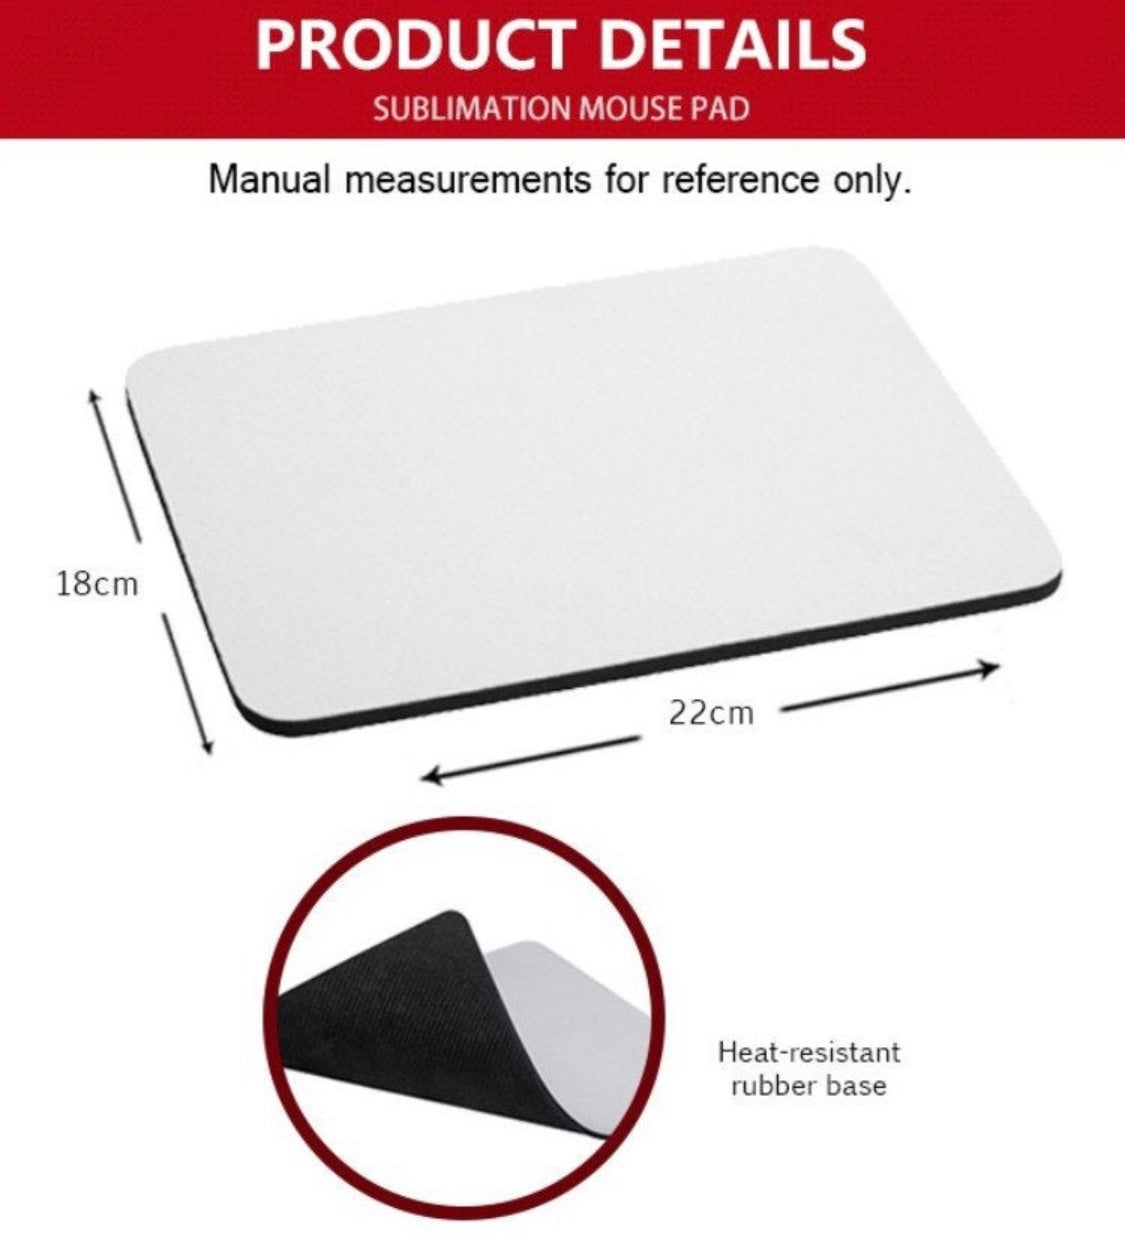 7.75" x 9.25" Mousepads for Sublimation Printing - 1/8" thick